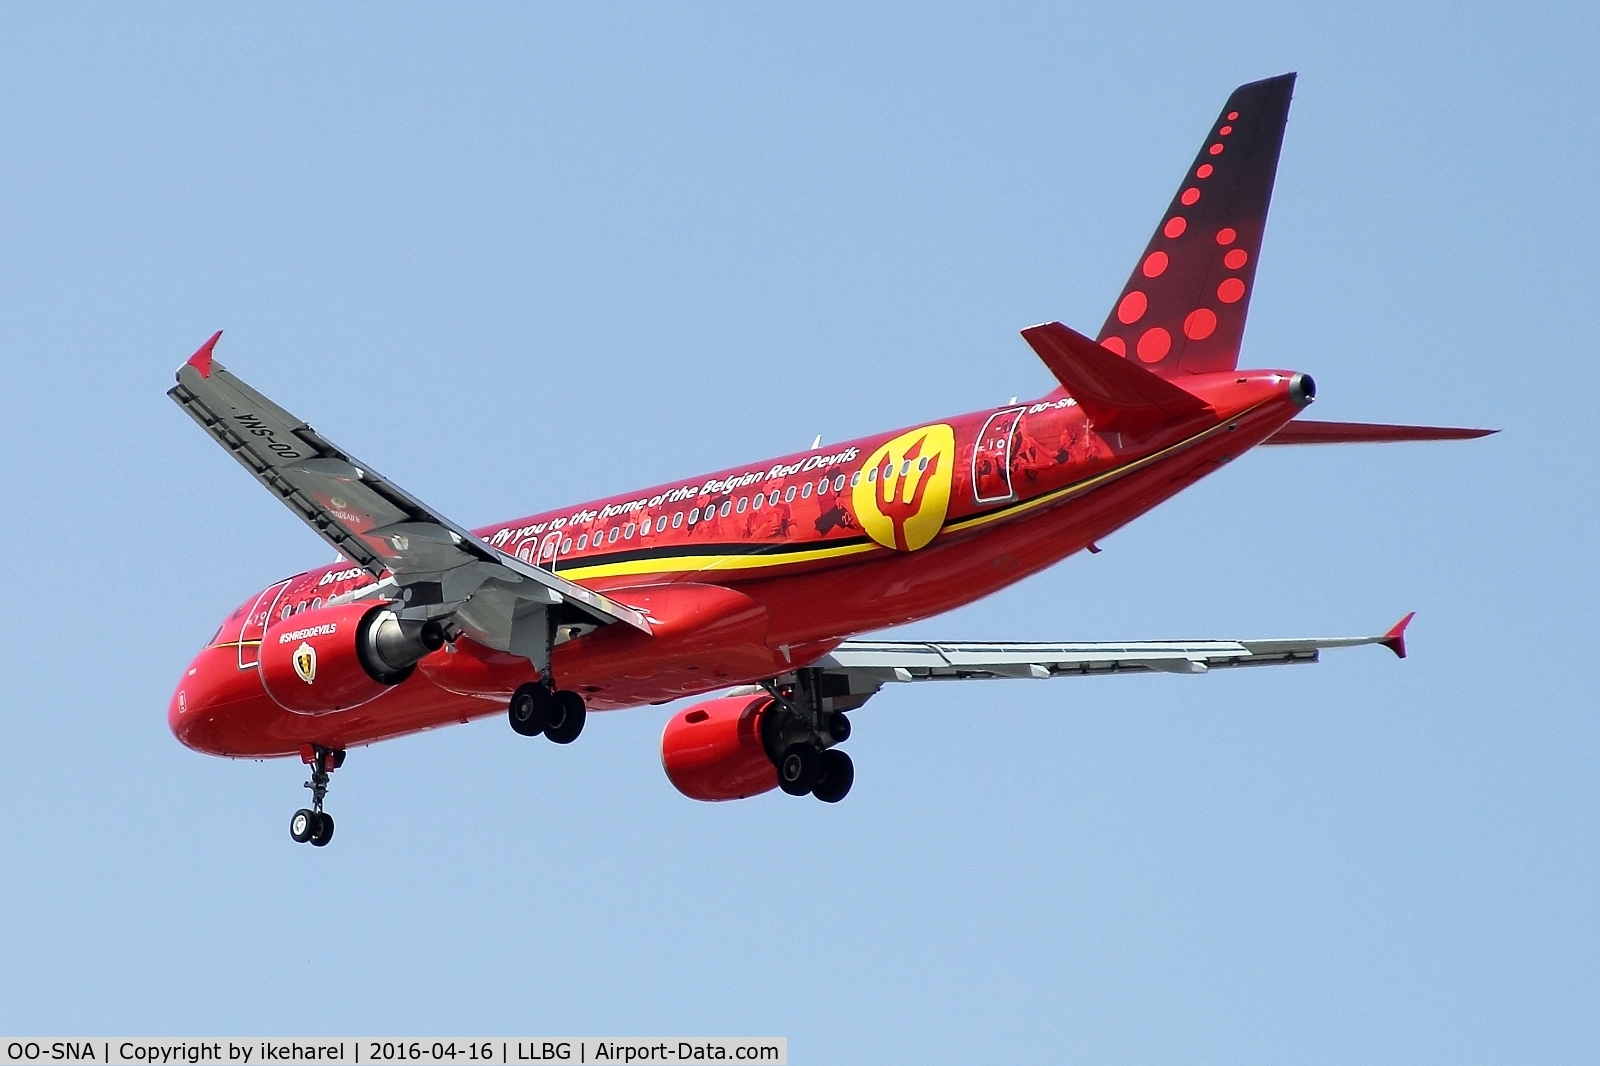 OO-SNA, 2001 Airbus A320-214 C/N 1441, Tail picture of the Red-Devils livery for Brussels-Airlines Airbus.